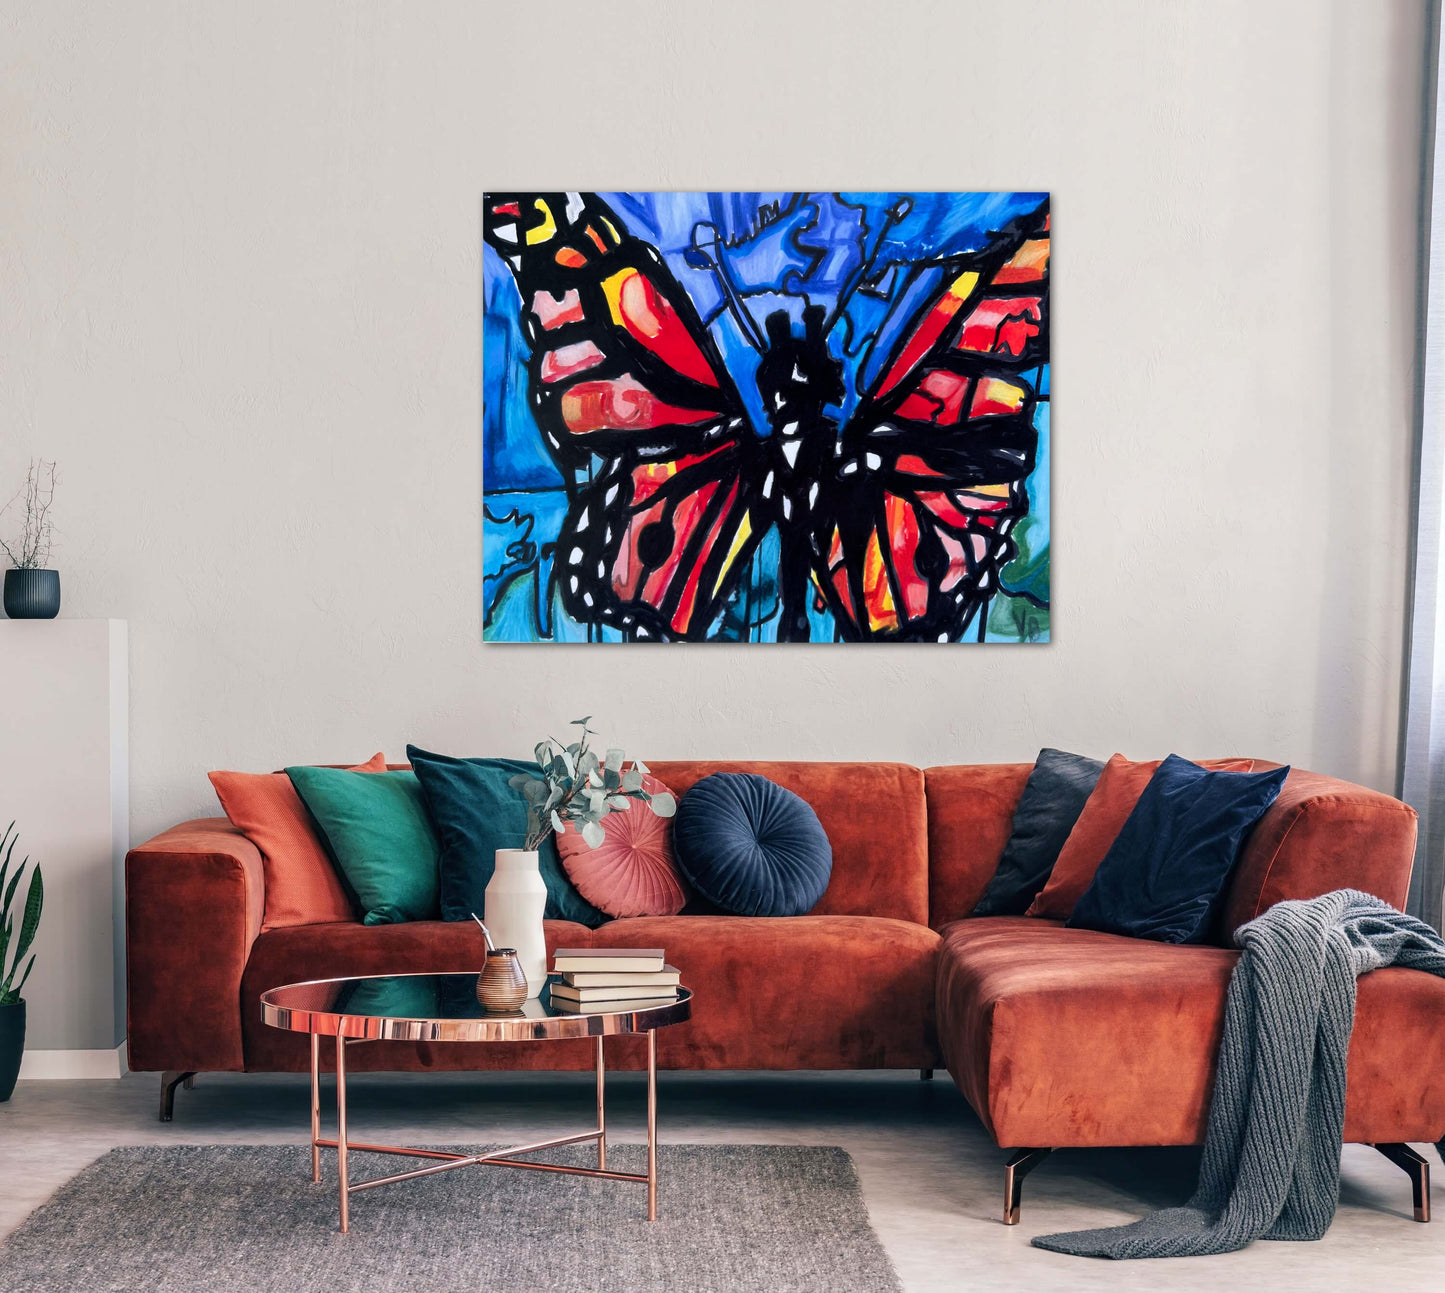 Monarch Butterfly - Print, Poster or Stretched Canvas Print in more sizes